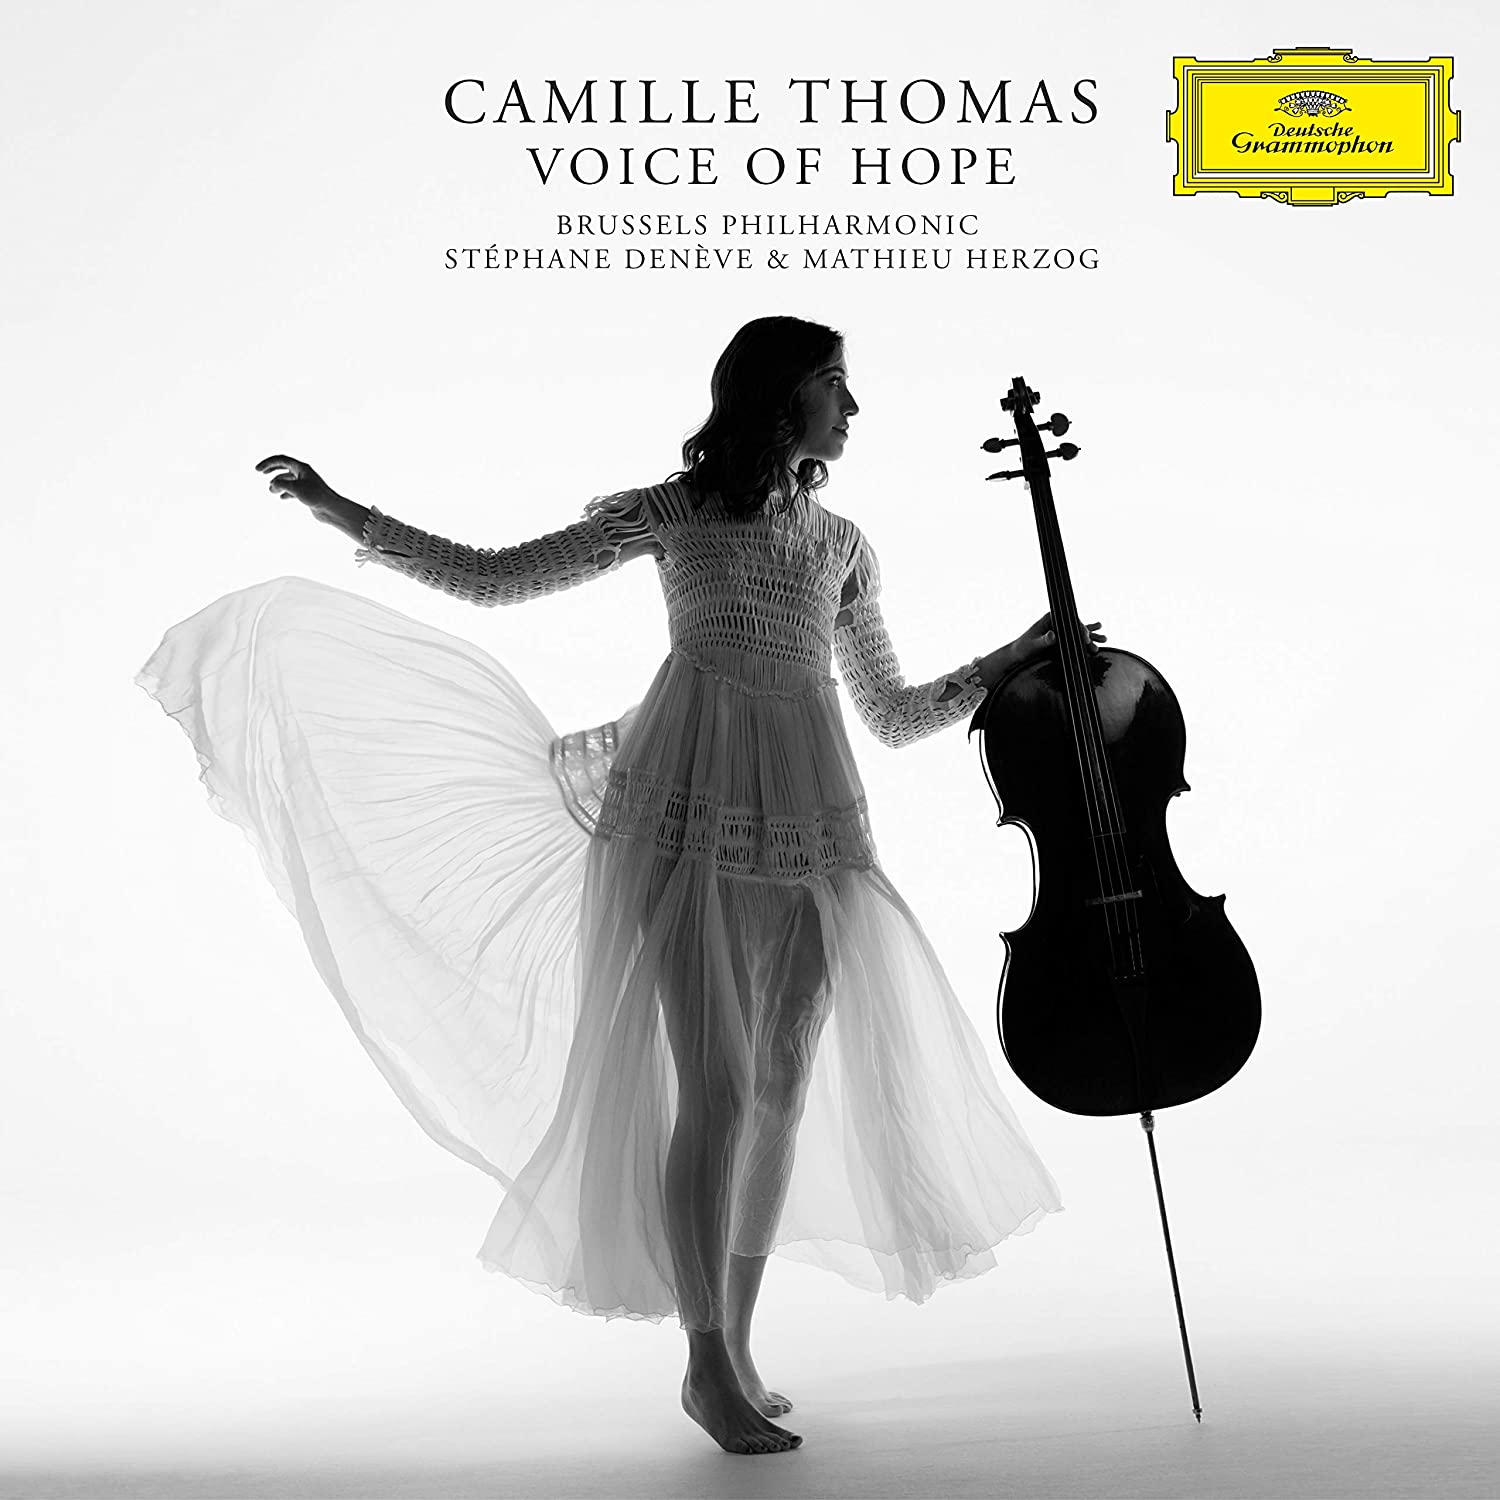 Review of Camille Thomas: Voice of Hope